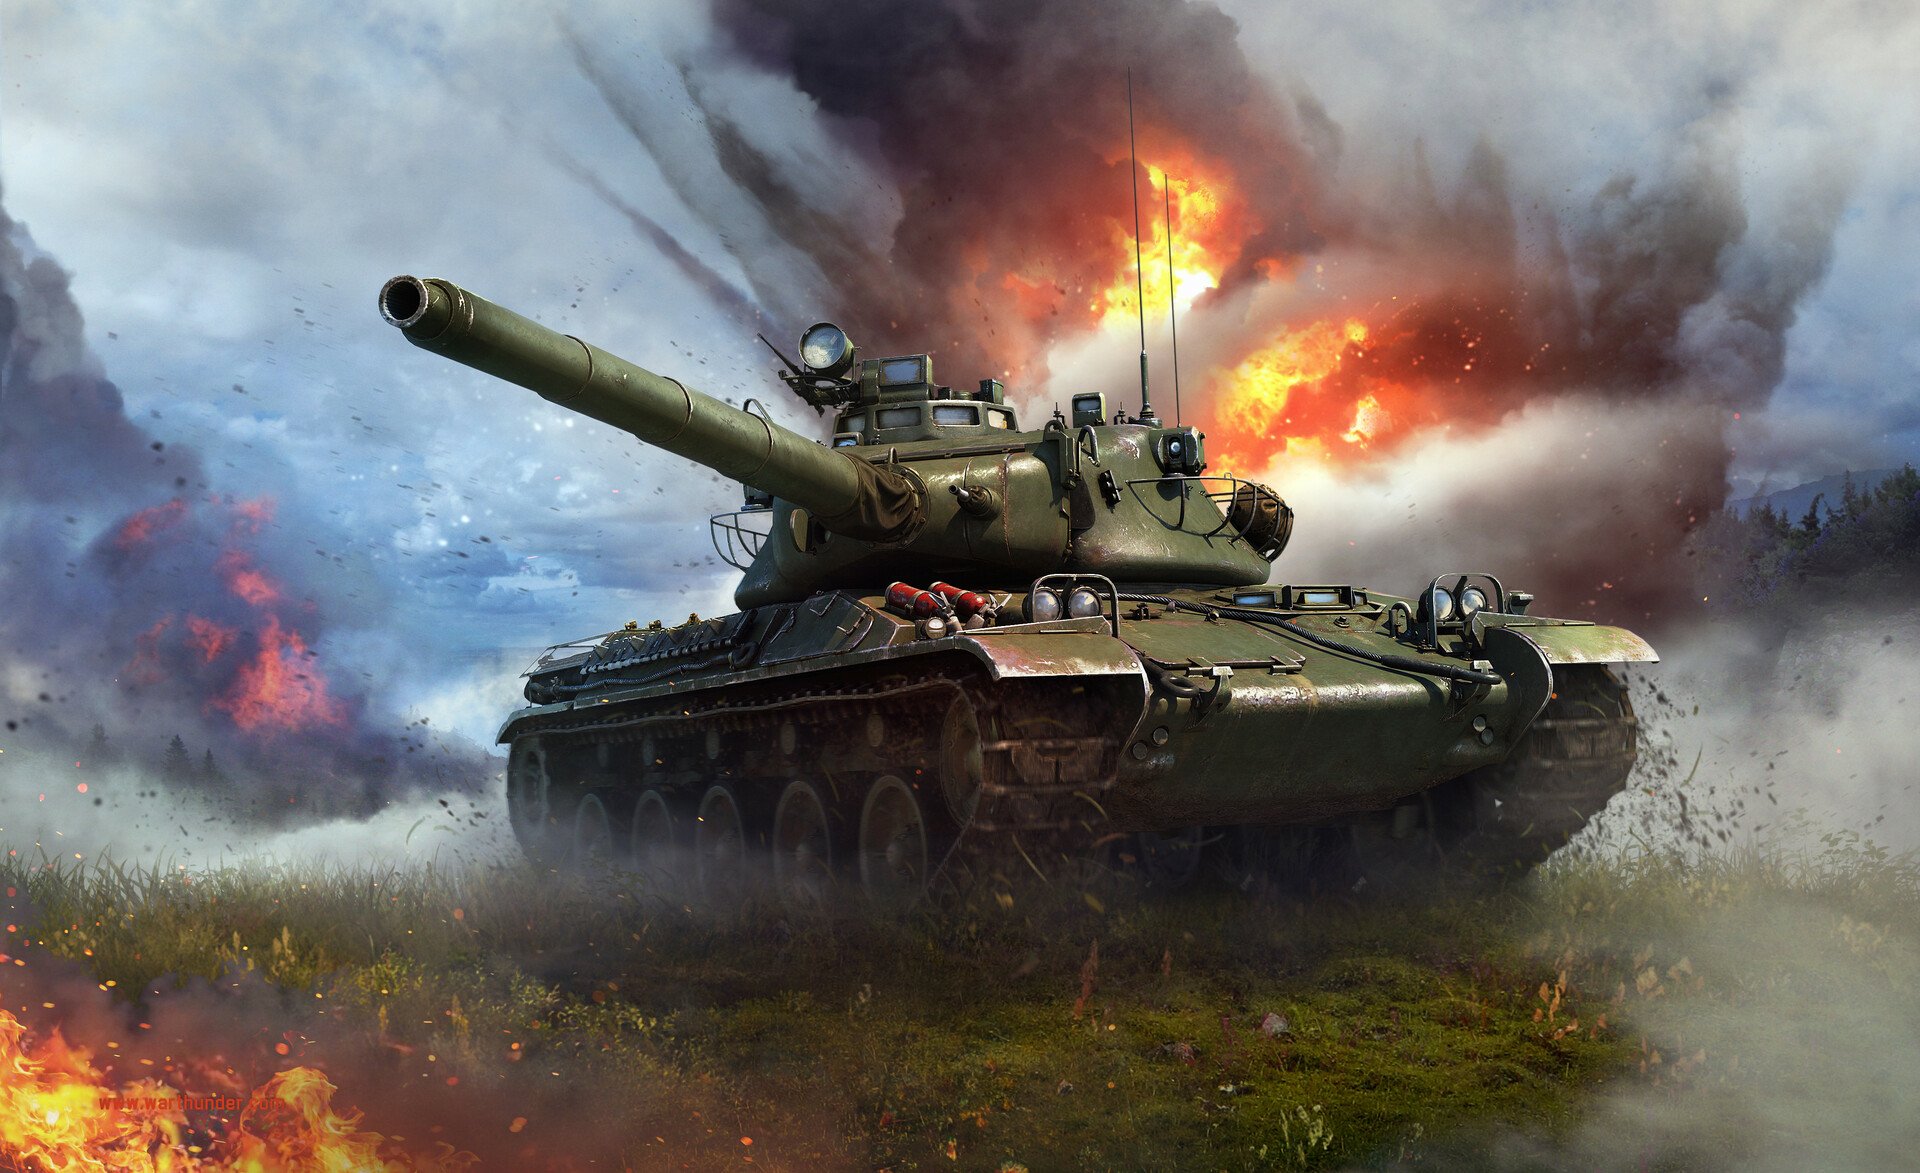 download size of war thunder